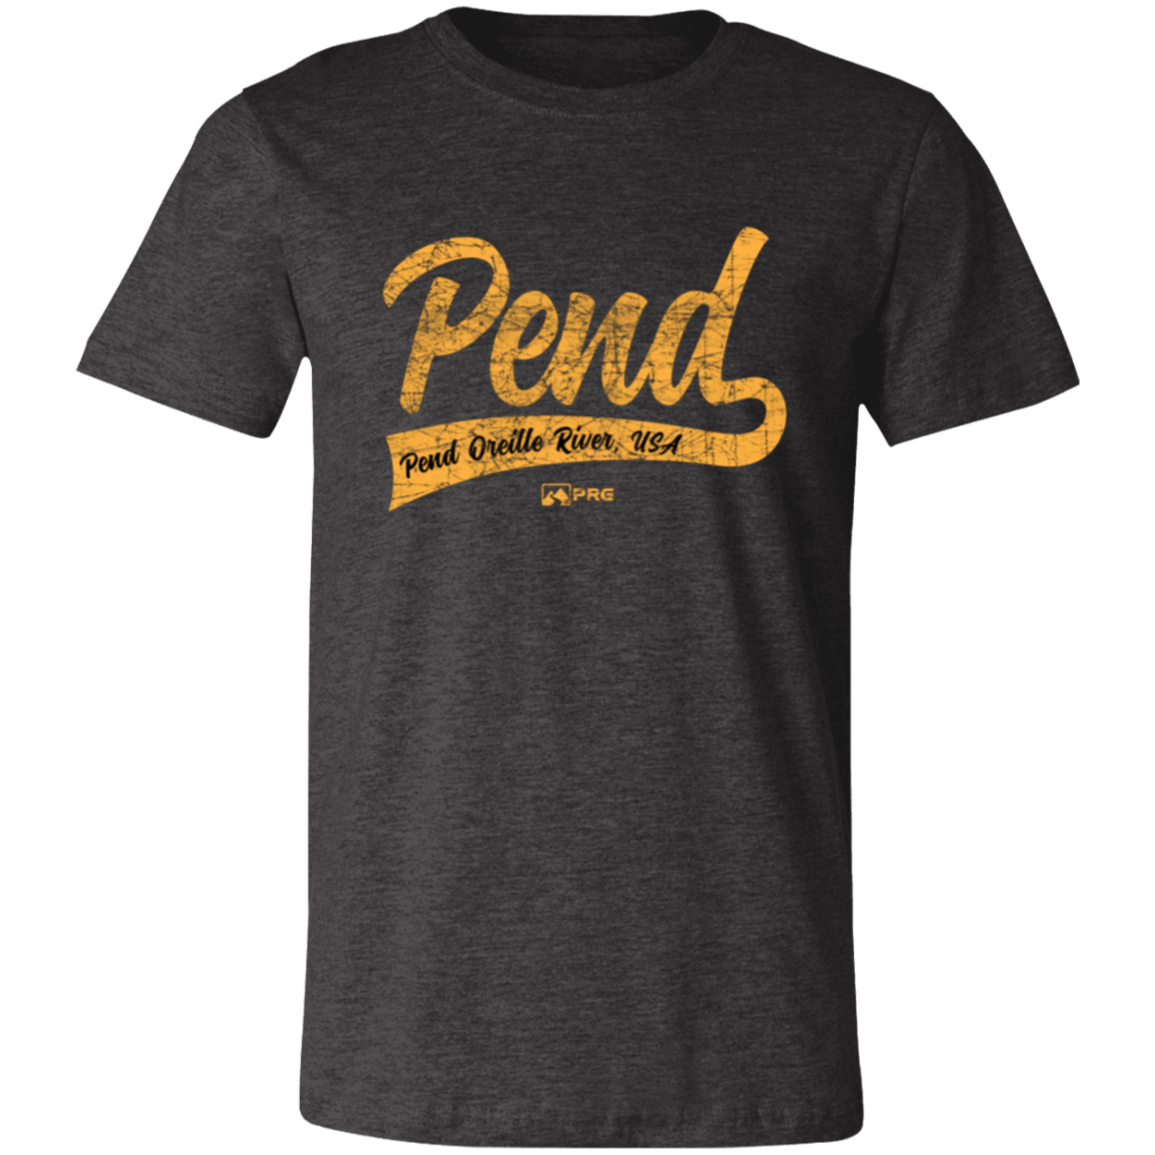 Pend for the Pennant - Shirt